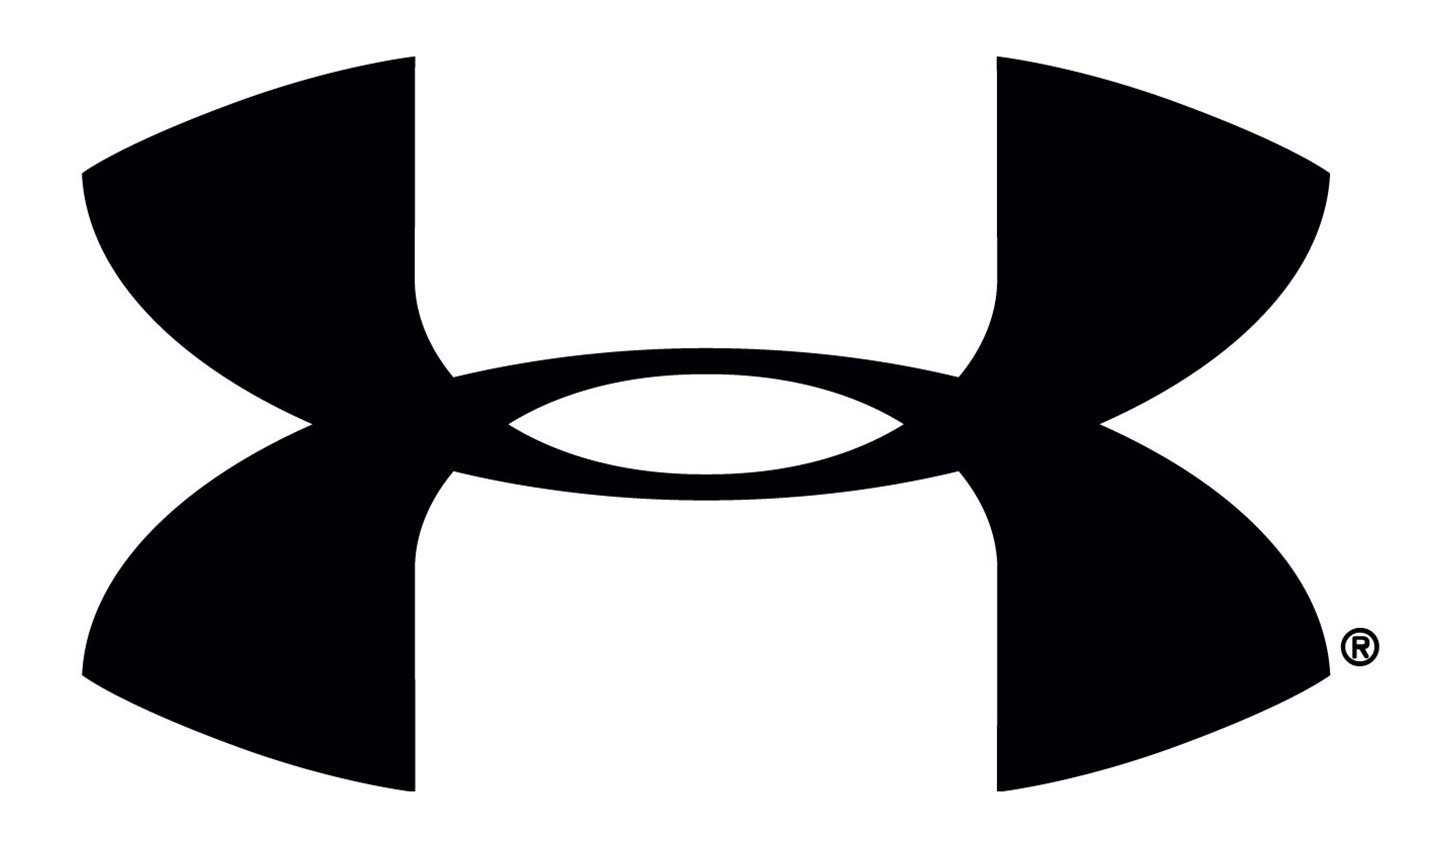 Under Armour Logo Wallpaper Hd Wallpapers in Logos Imagescicom